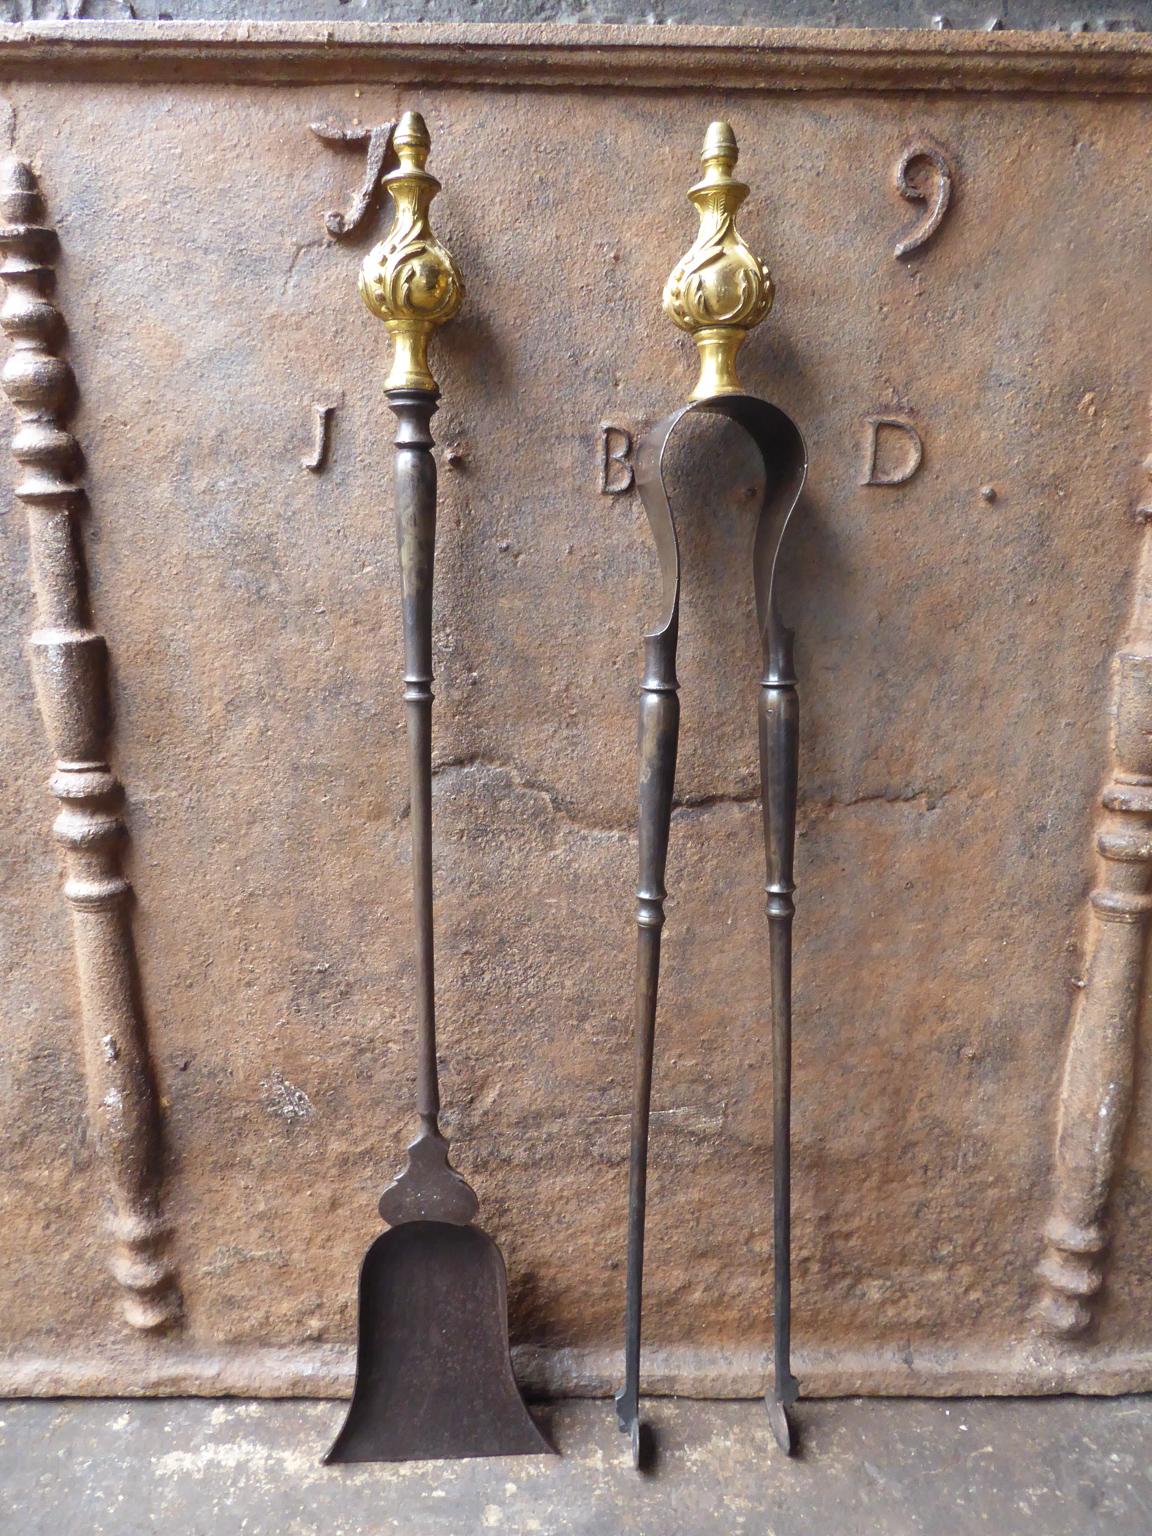 Large 18th century French Louis XV fireplace tool set consisting of fireplace tongs and a shovel. The fire irons are made of wrought iron with a bronze handle. They are in a good condition and are fully functional.